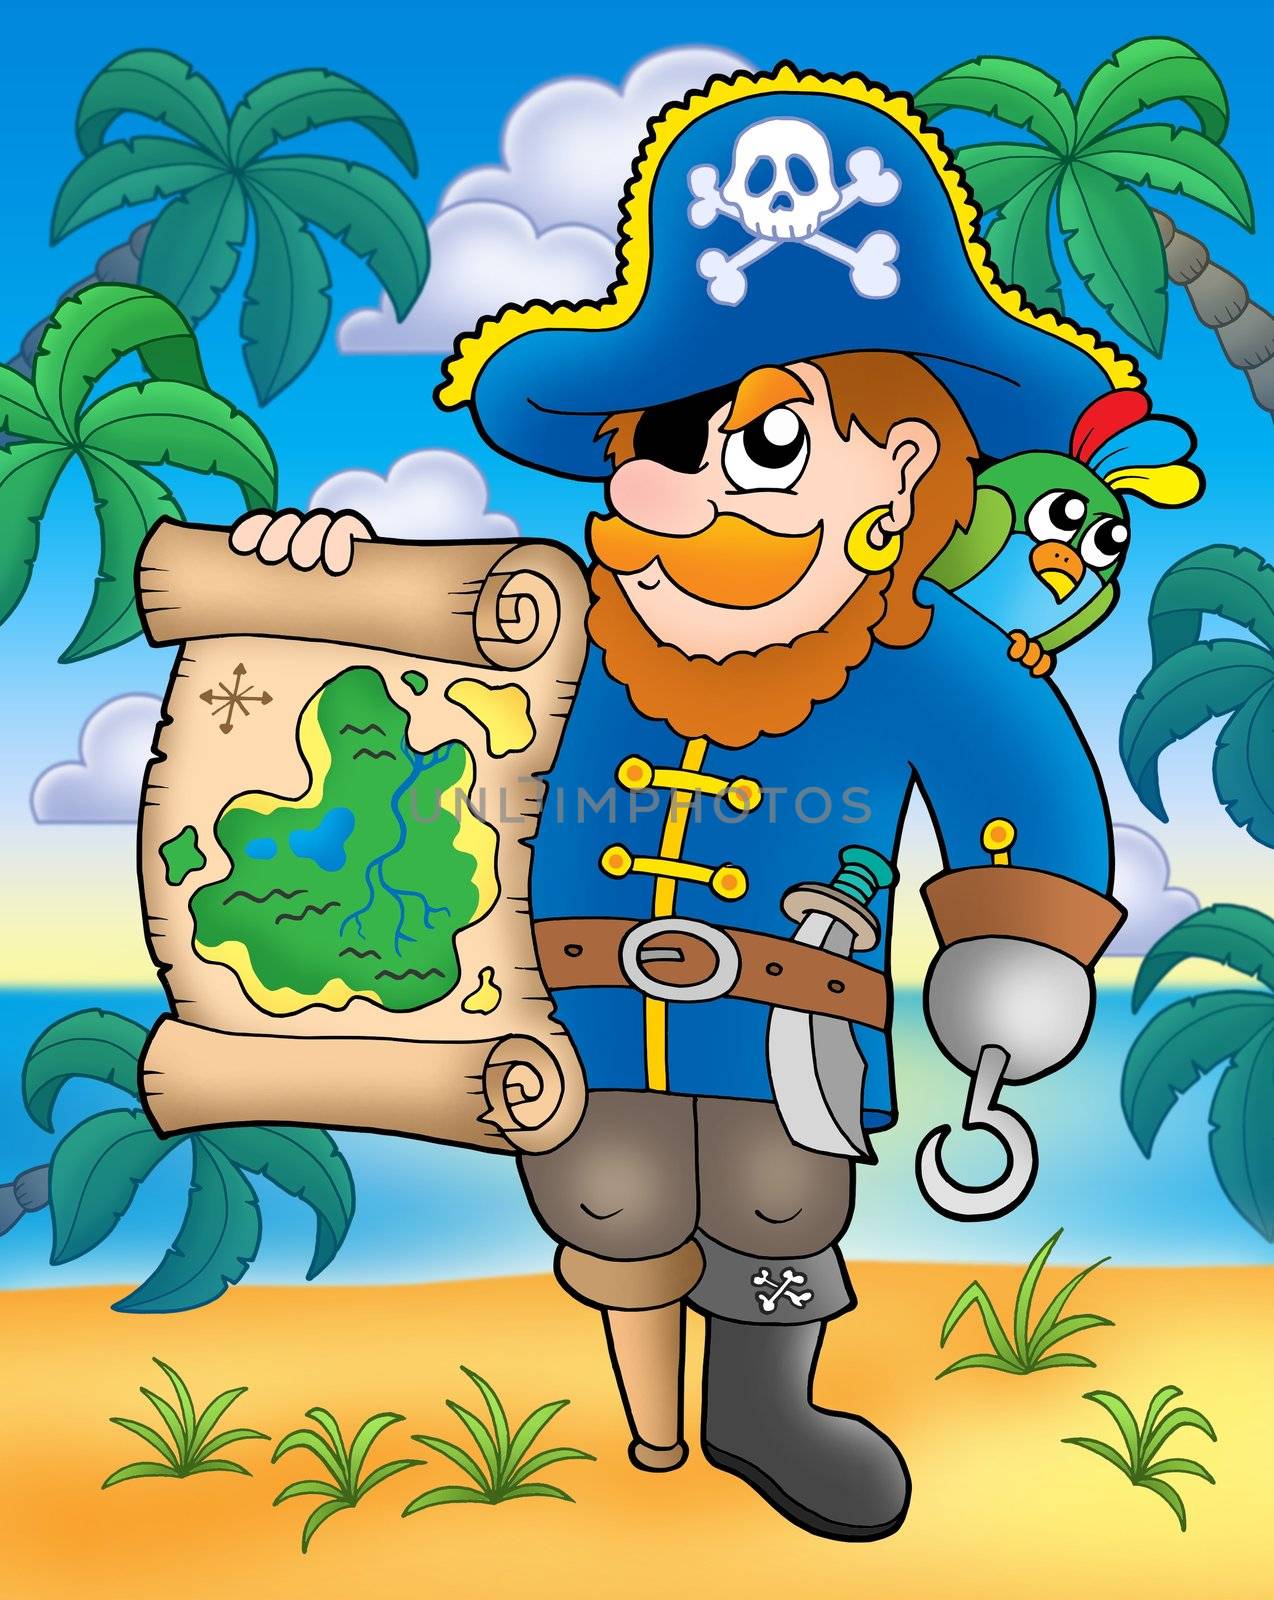 Pirate with treasure map on beach - color illustration.